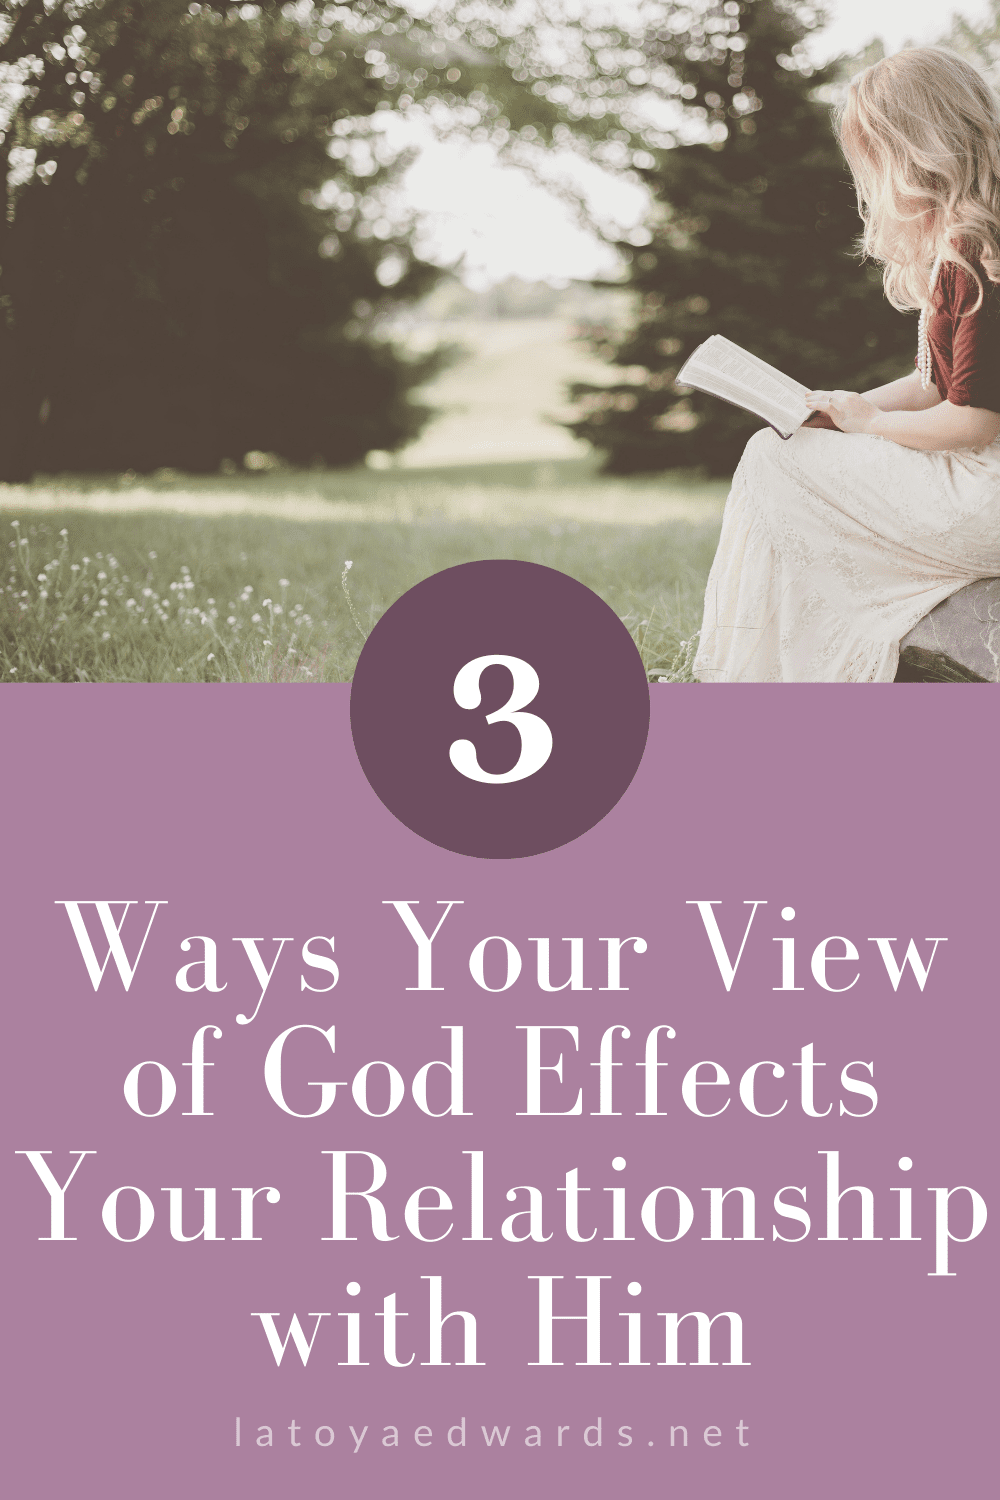 The way that you view God has an immense effect your relationship with him. As a christian woman walking through hard times you want to spend you time with God in ways that are effective and actually help you grow closer to God. Learn 3 different ways of thinking about God than can either help or hinder your spiritual growth.